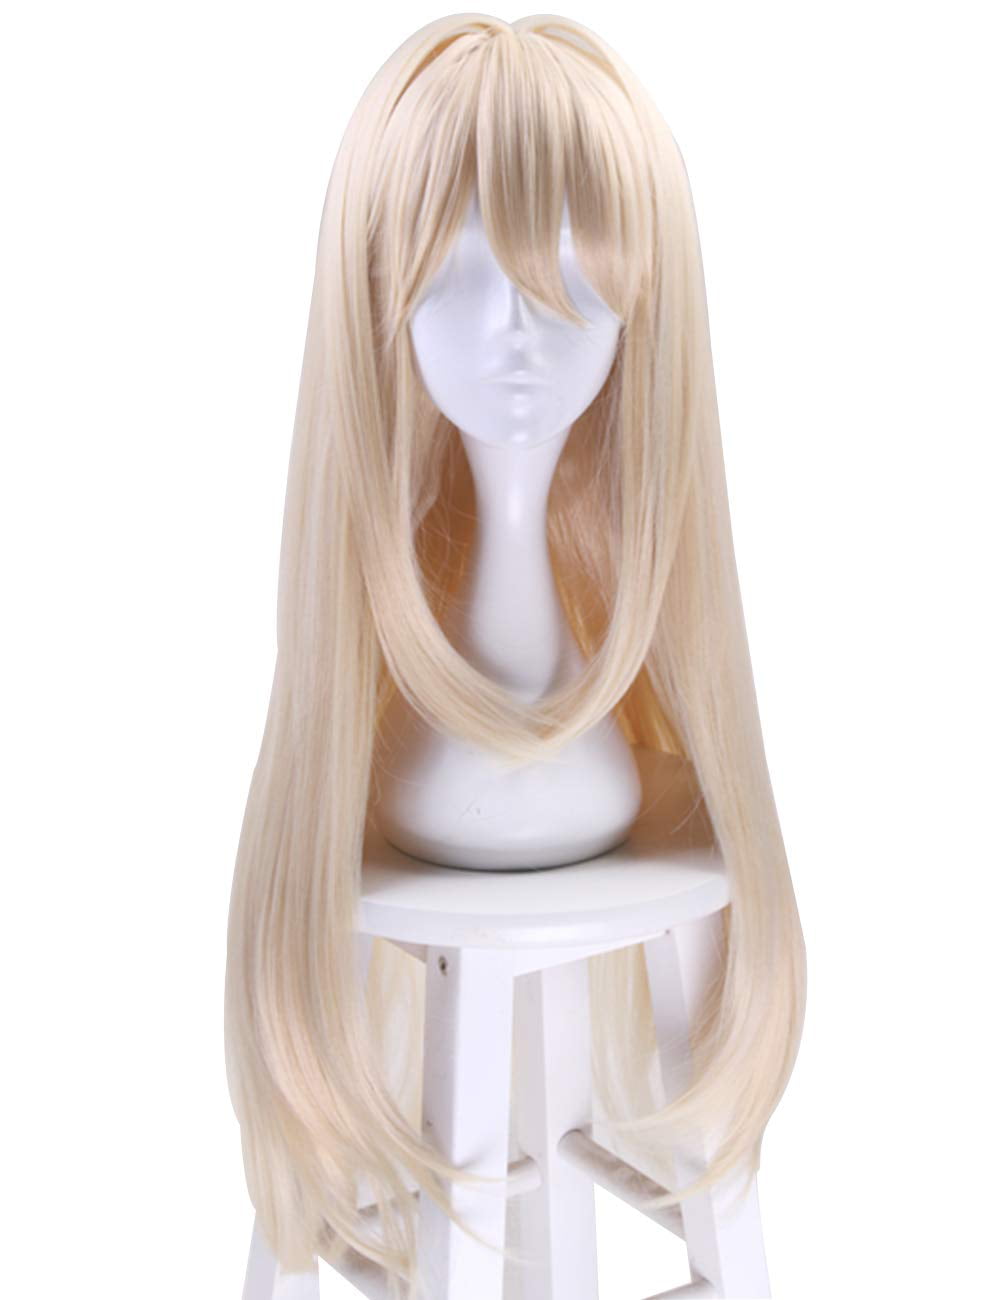 Blend S Kanzaki Hideri Aus Cosplay Wigs Synthetic fiber Party hair Anime Wig 